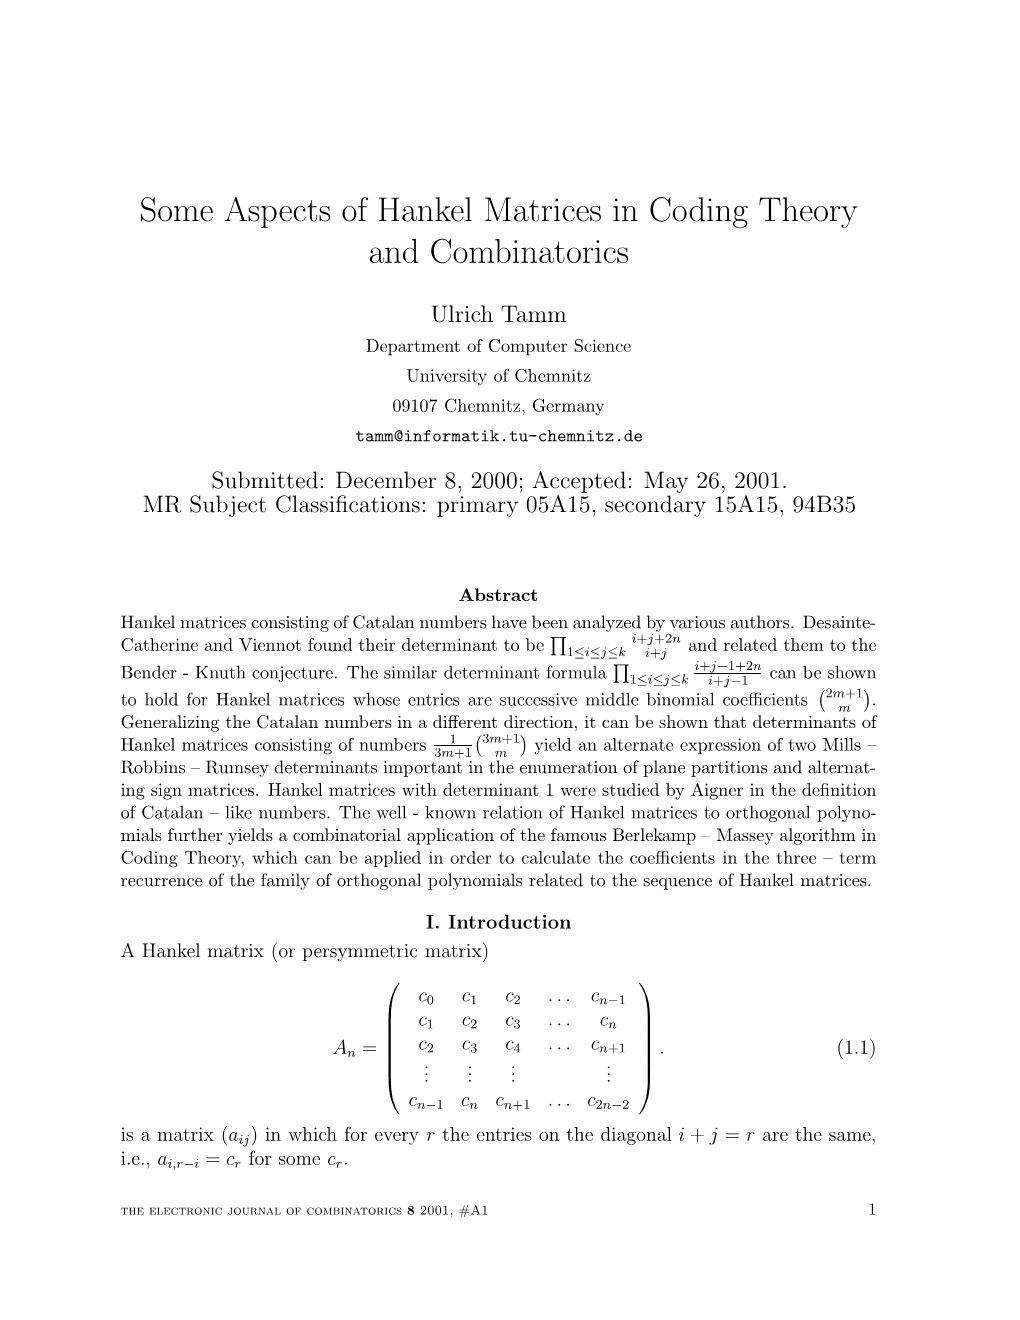 Some Aspects of Hankel Matrices in Coding Theory and Combinatorics